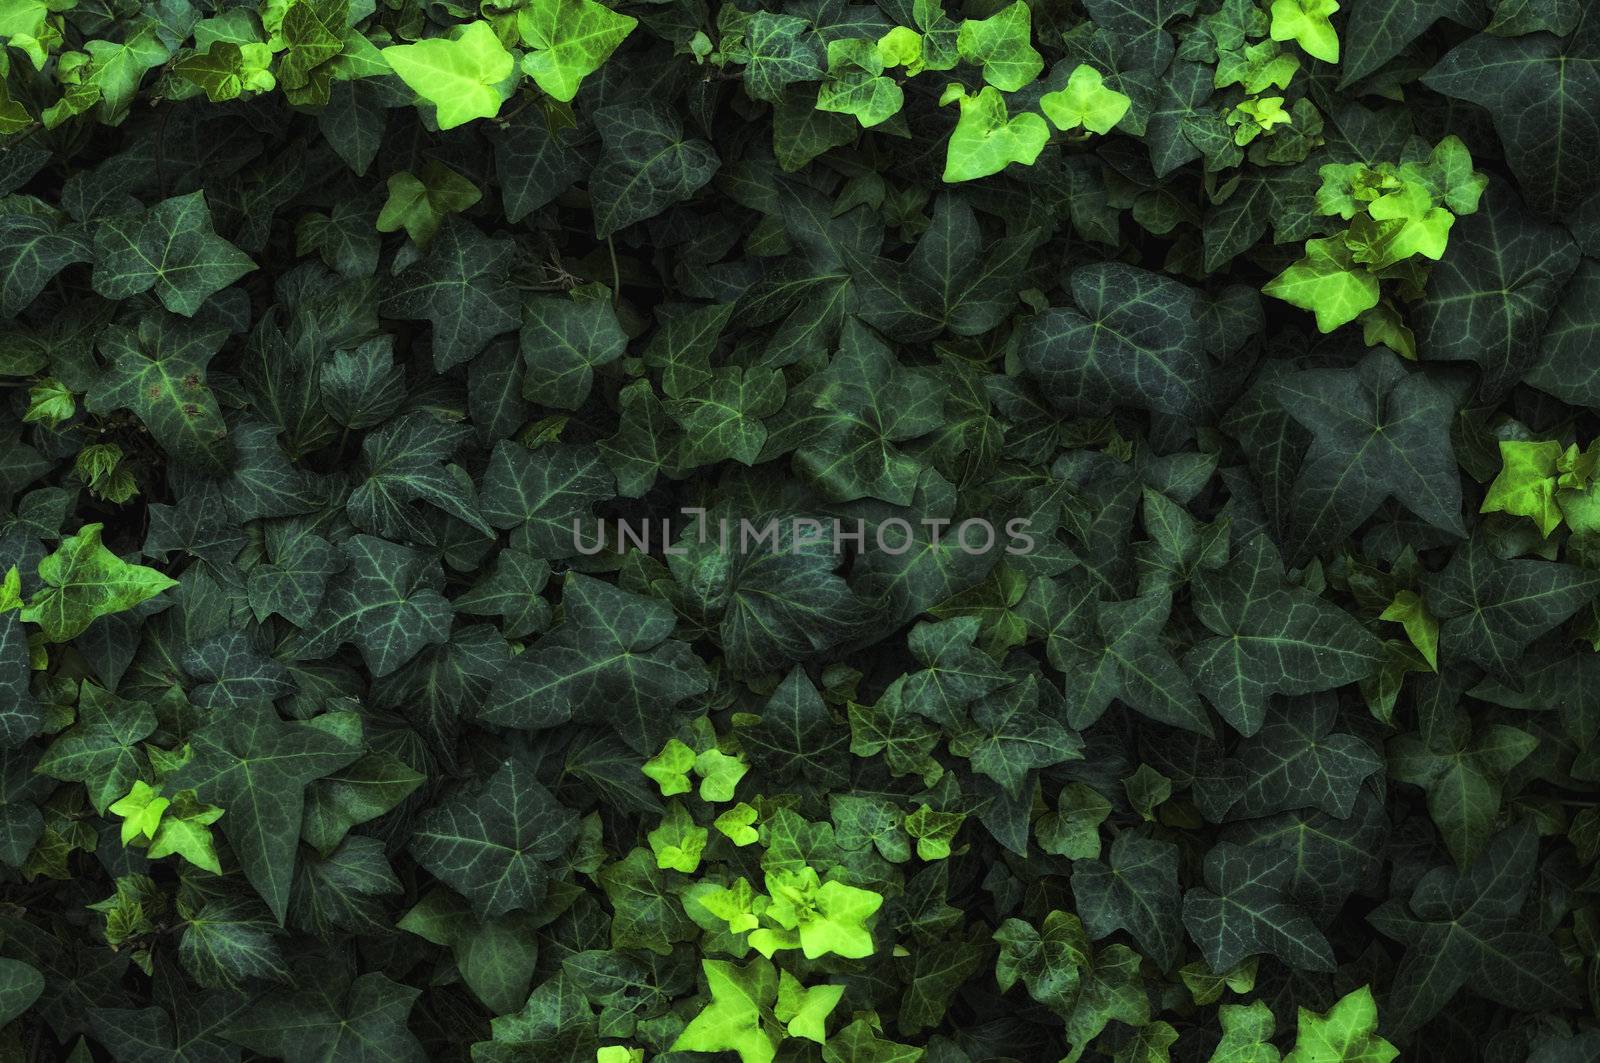 Bed of Ivy by watamyr